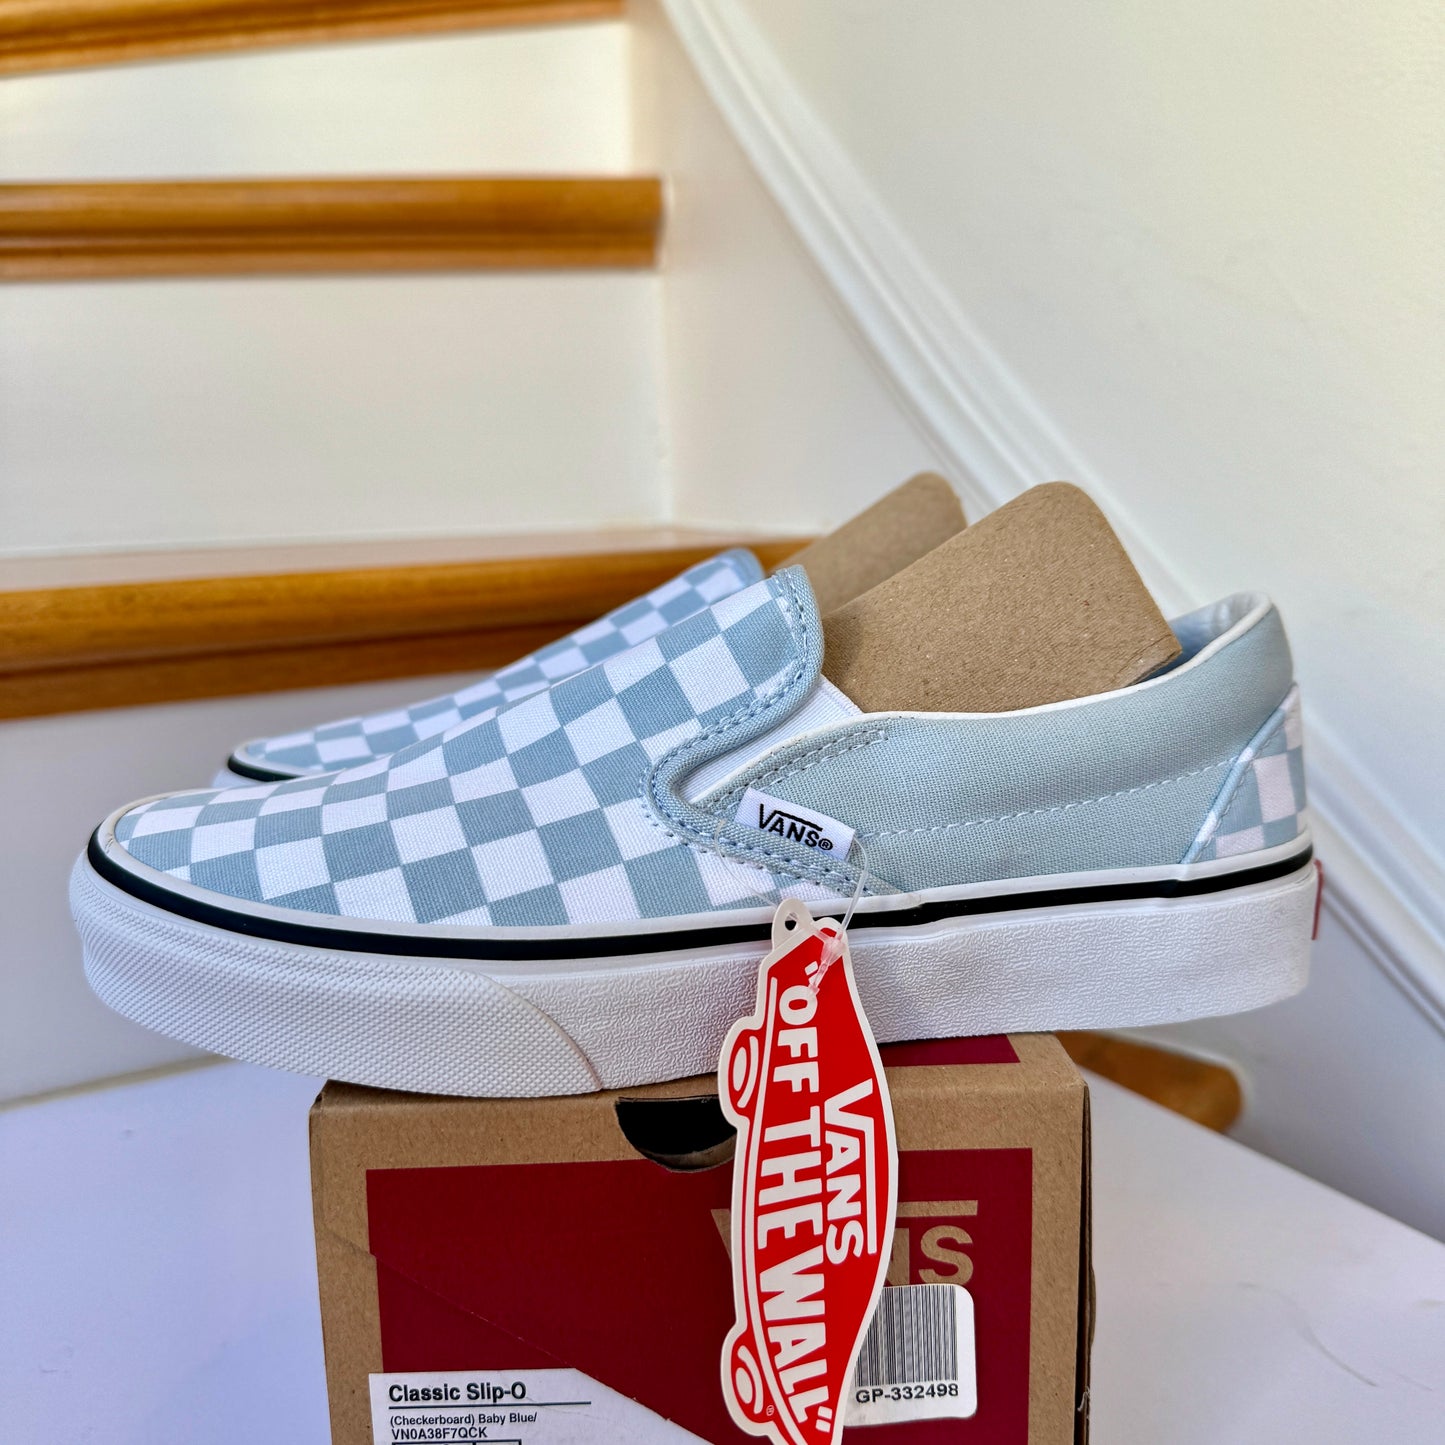 Vans Slip-On Classic Skate Shoes Checkerboard Baby Blue Shoes Classic Unisex